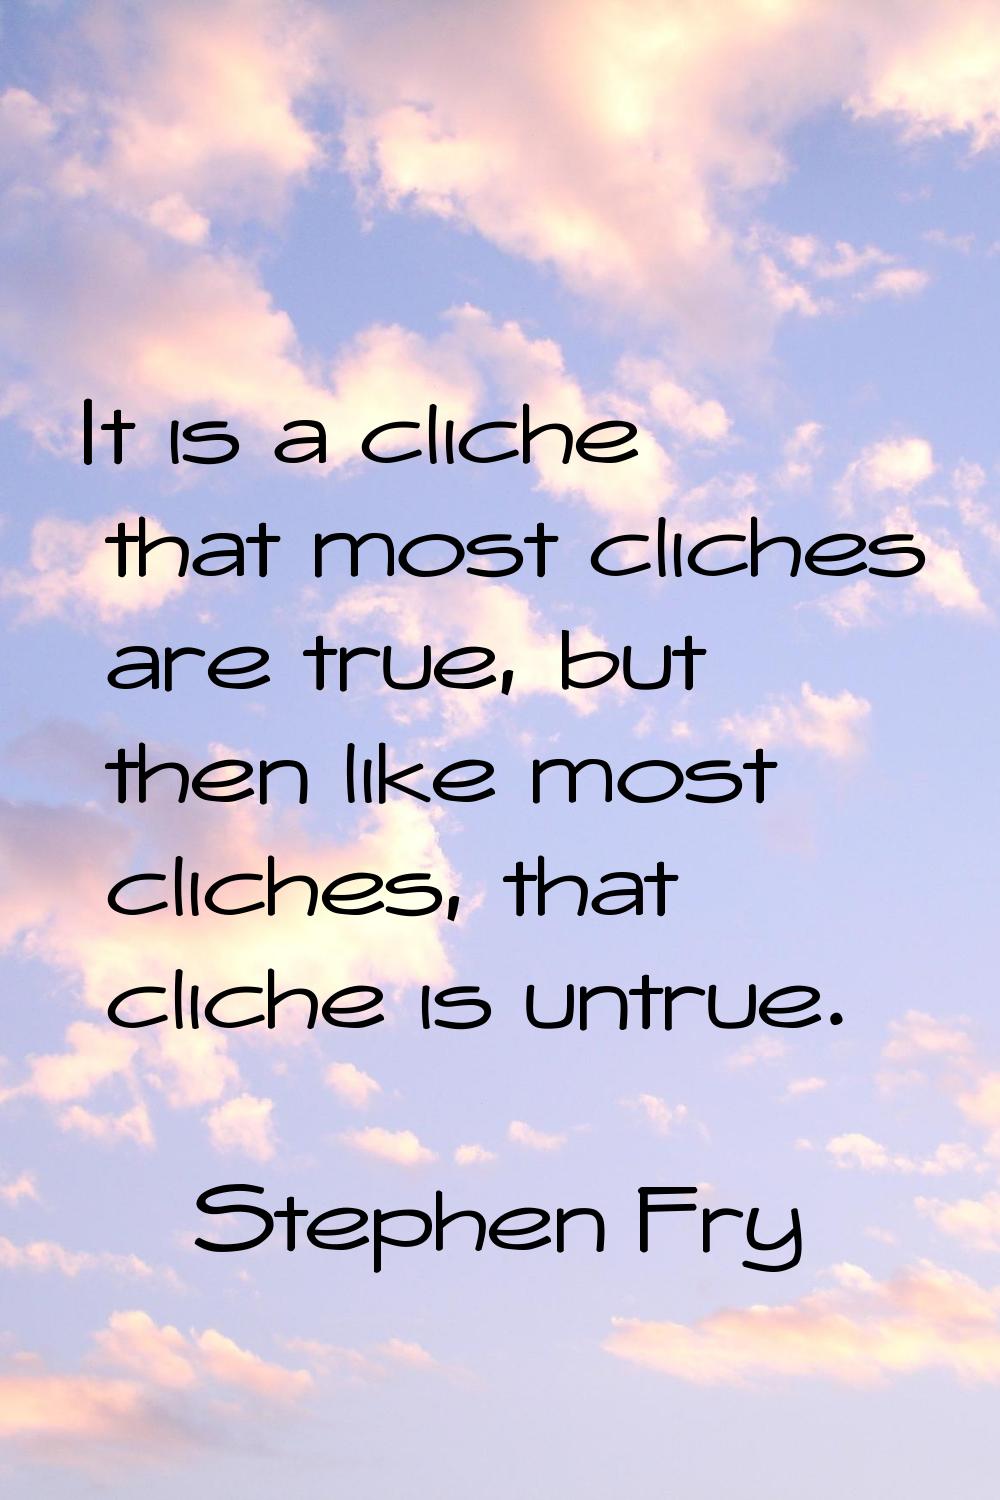 It is a cliche that most cliches are true, but then like most cliches, that cliche is untrue.